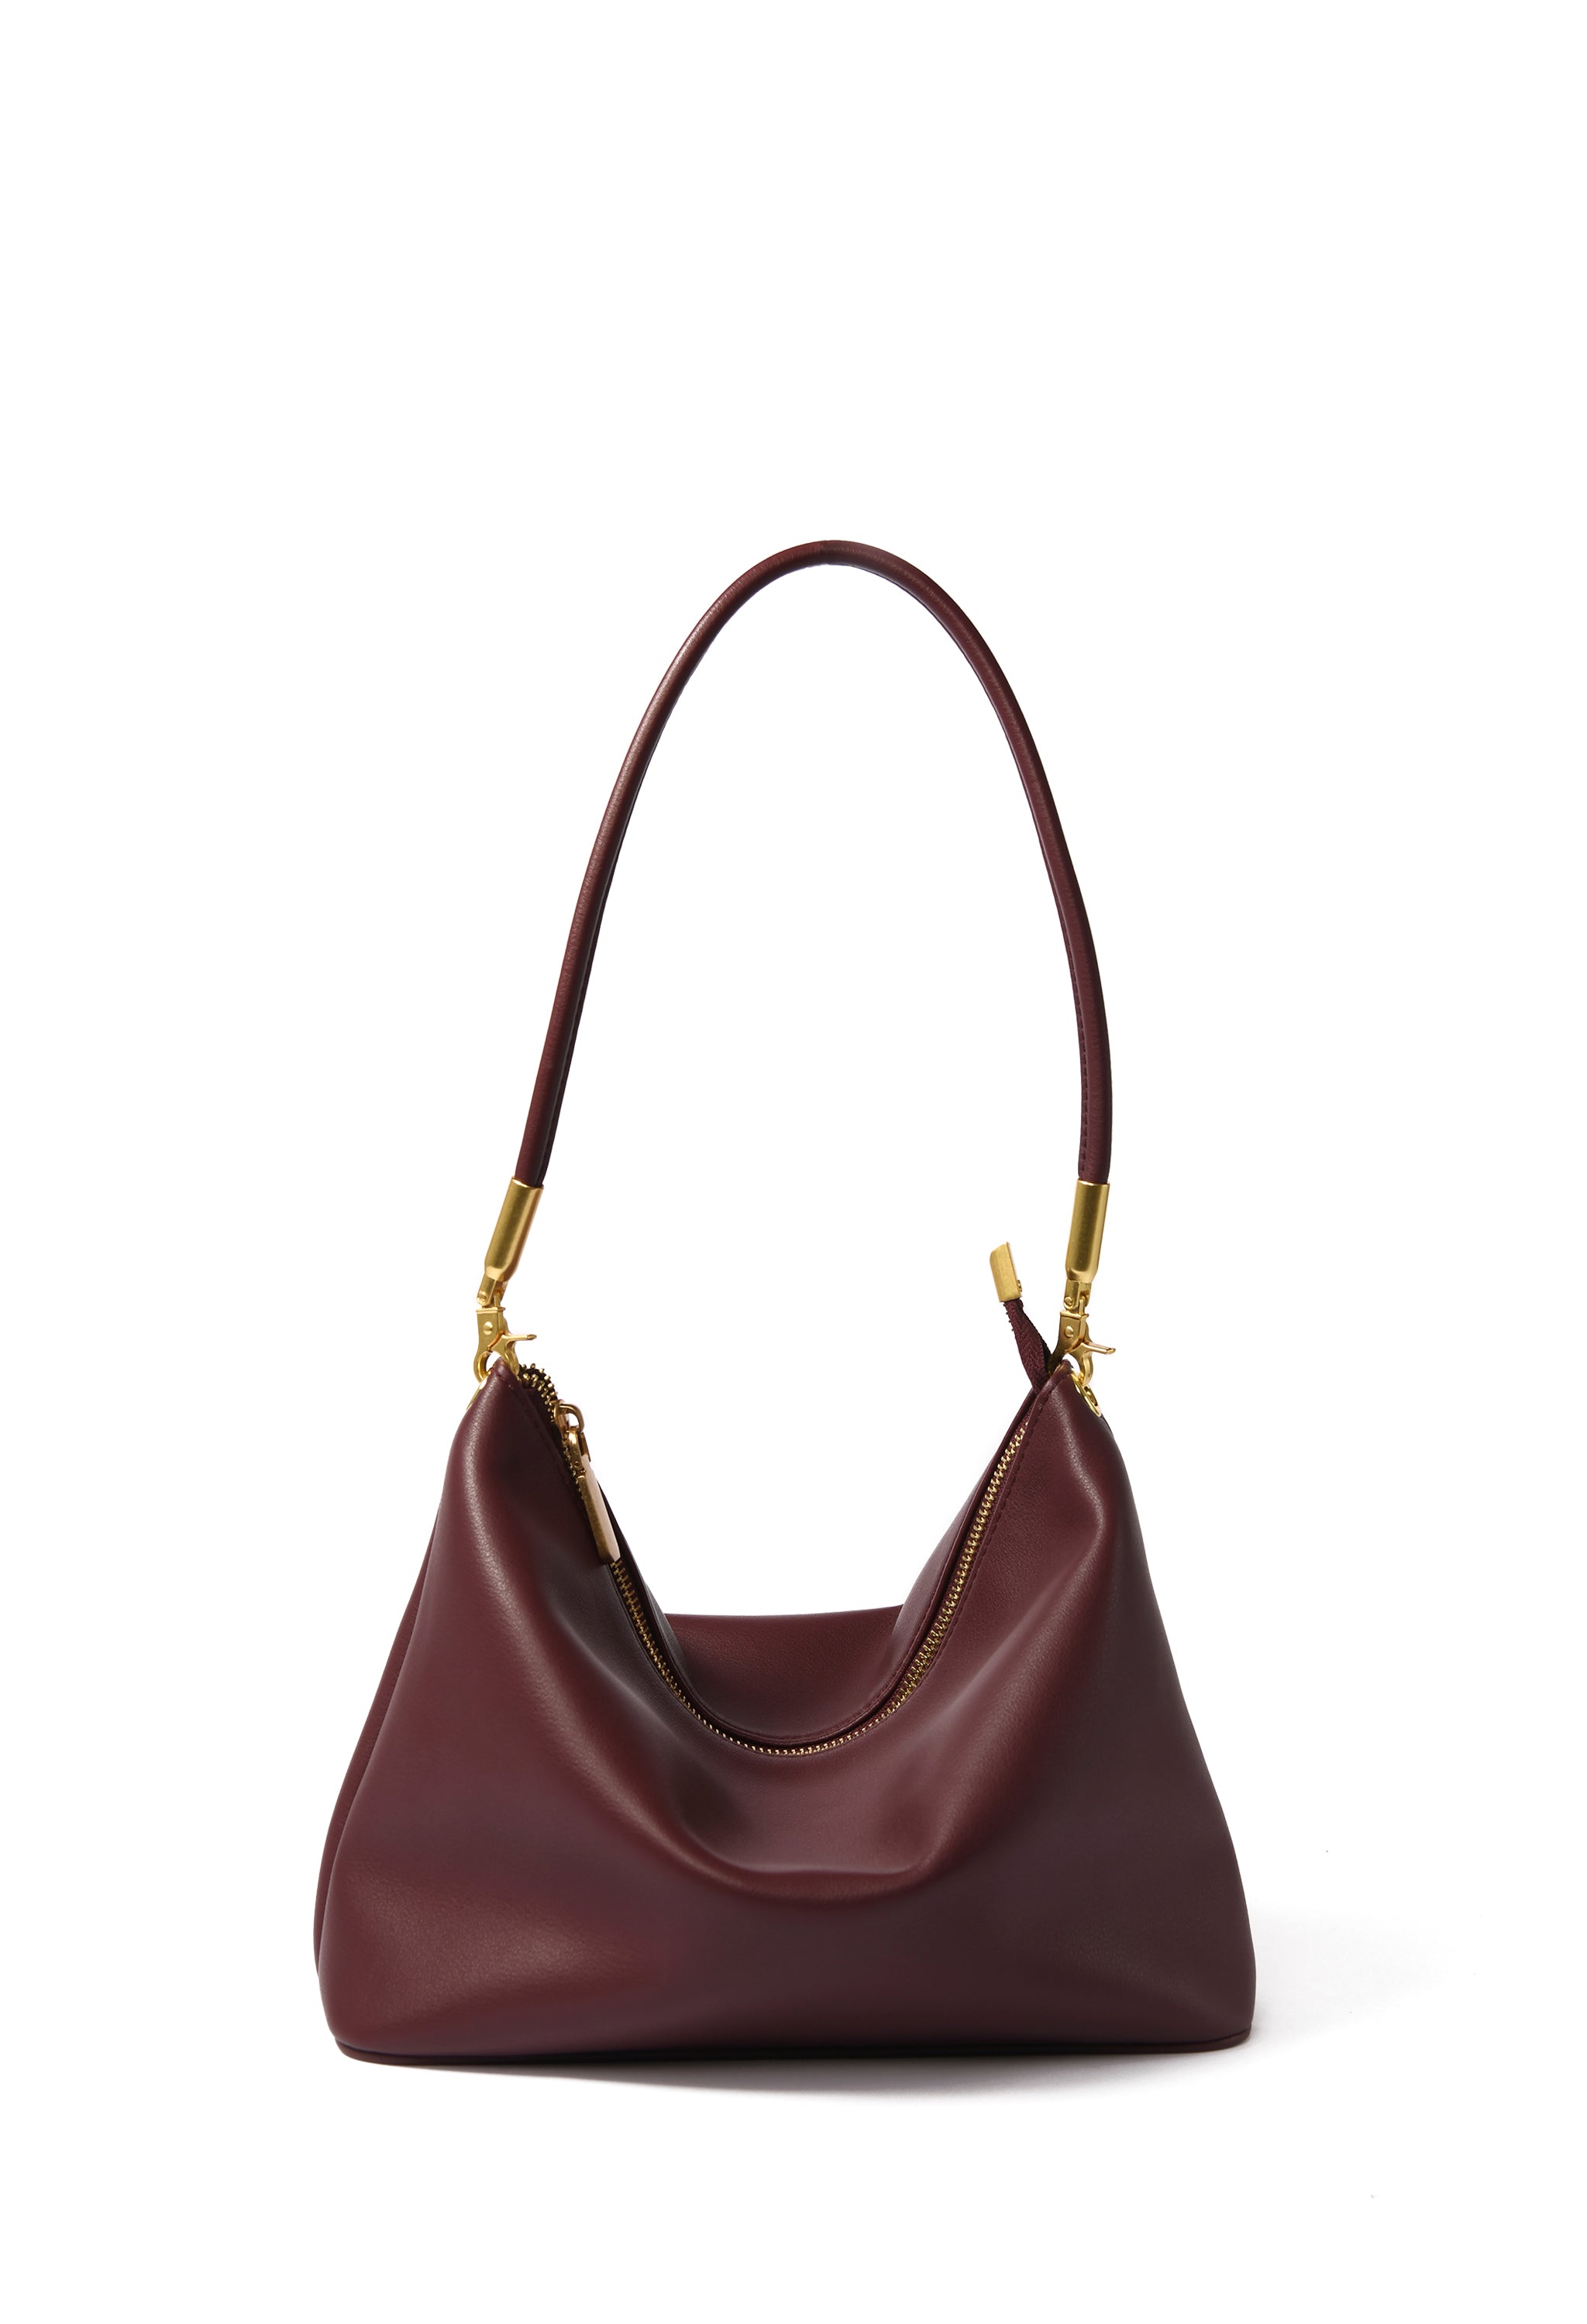 Aubrey Bag in smooth leather, Wine